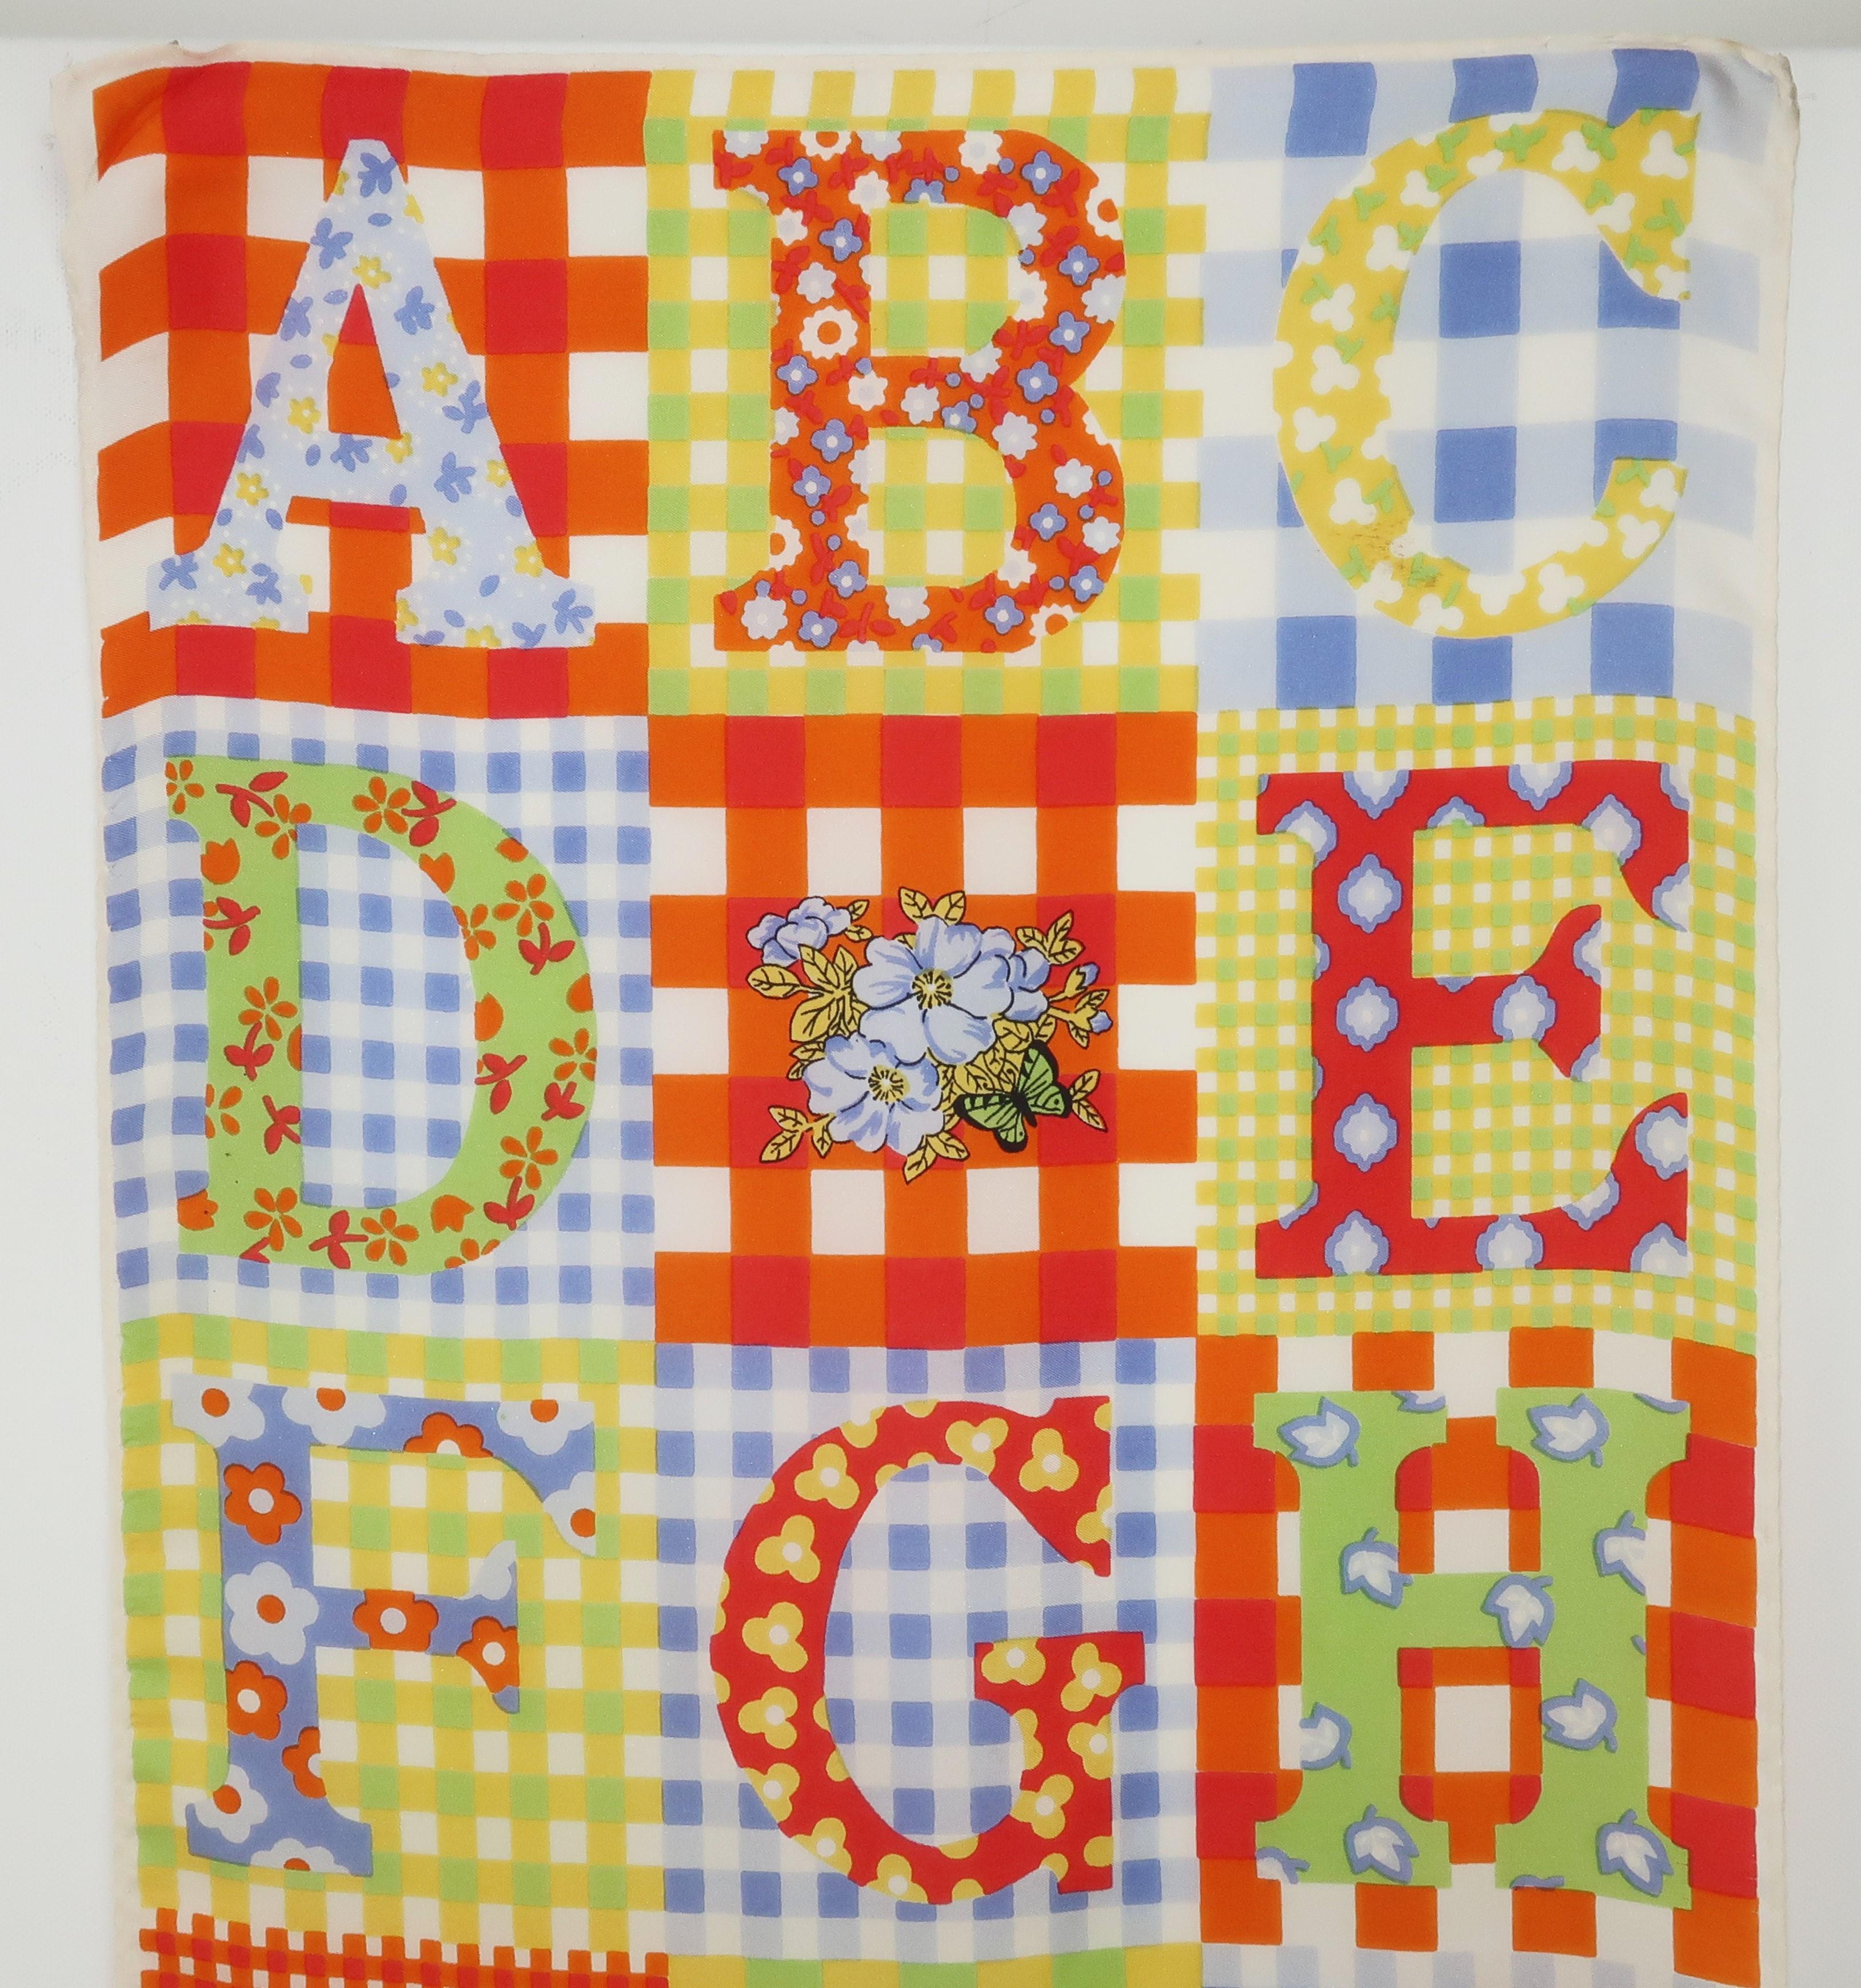 Get the 'ABC's' of style from the American fashion icon, Gloria Vanderbilt.  This long silk scarf from the 1970's depicts art work created by Ms. Vanderbilt and features a whimsical design with gingham backgrounds in shades of yellow, green, orange,